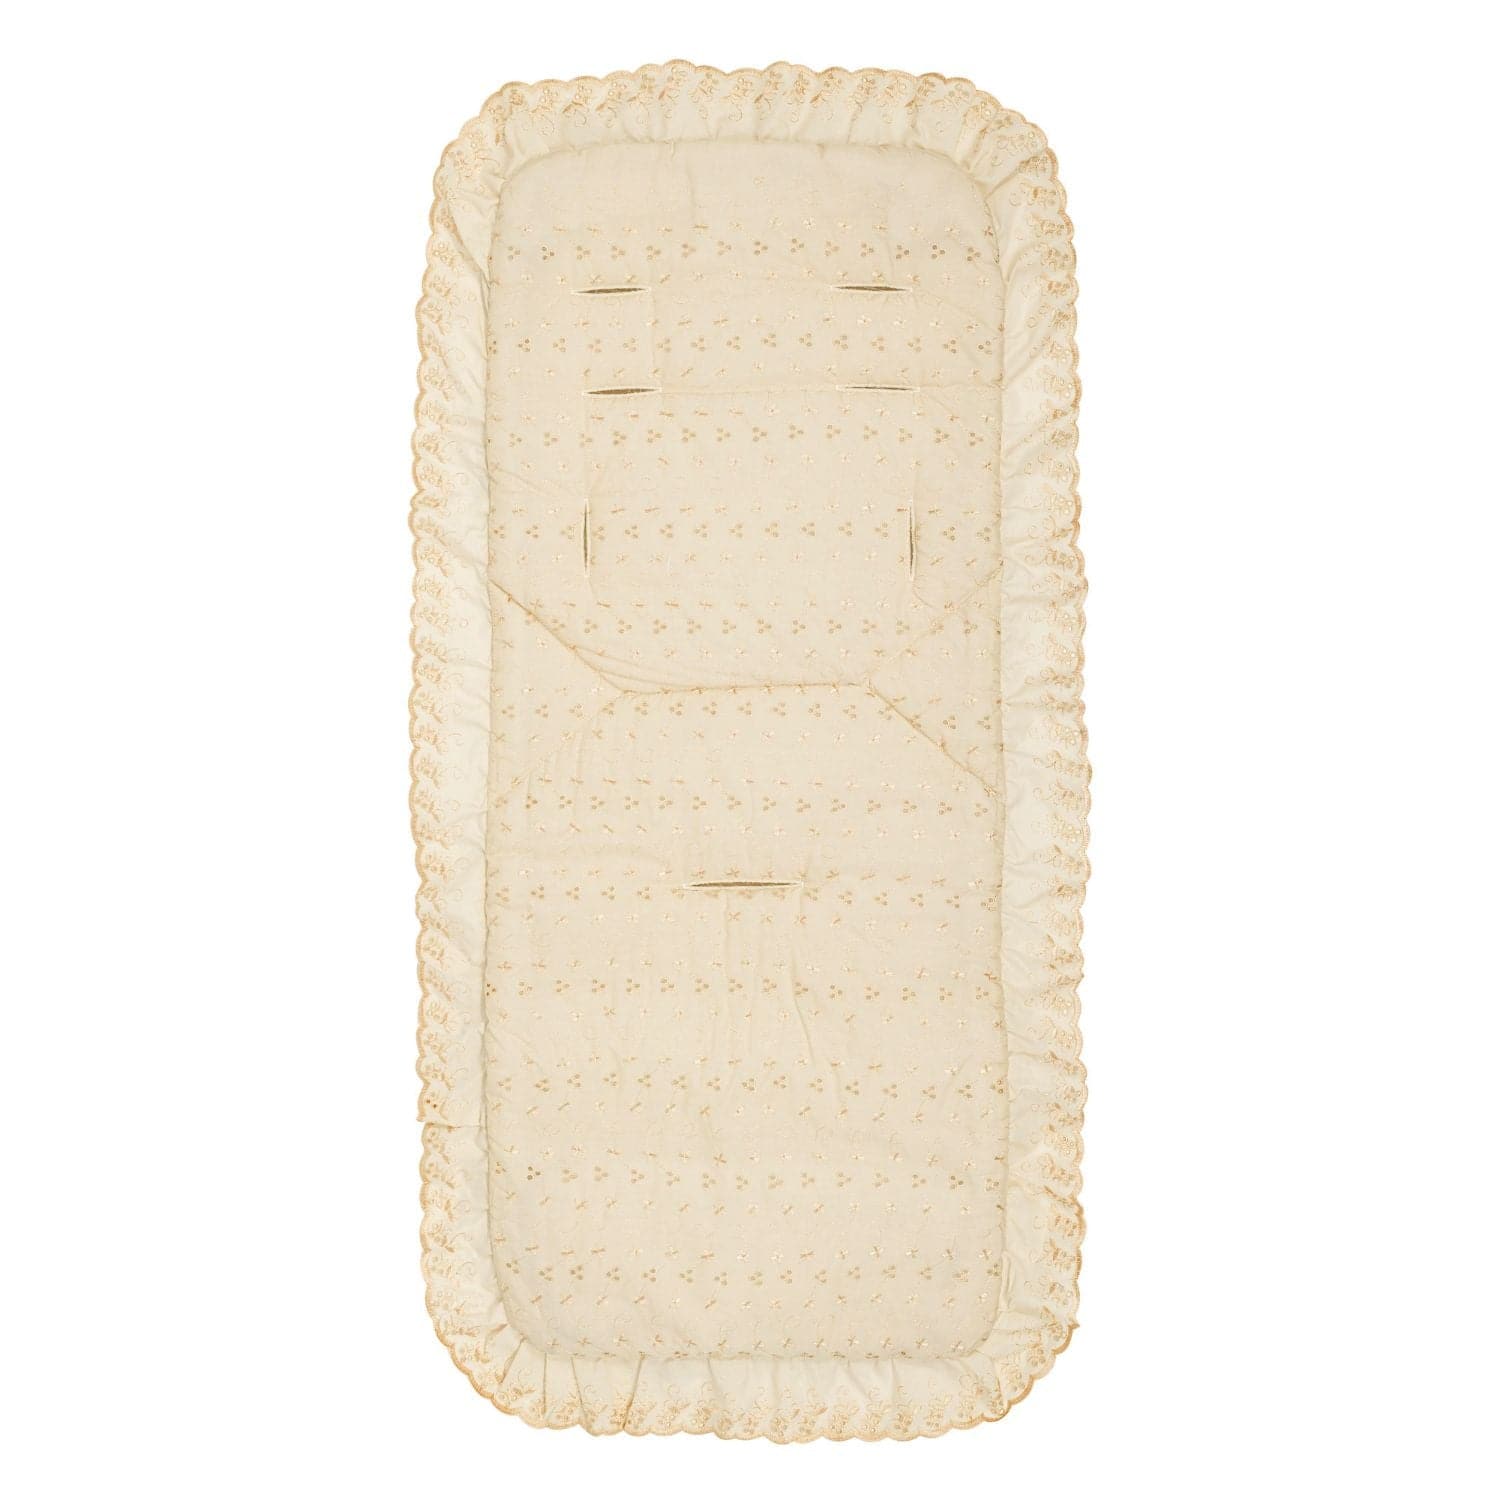 Broderie Anglaise Pushchair Seat Liner Compatible with DoBuggy - Fits All Models - For Your Little One